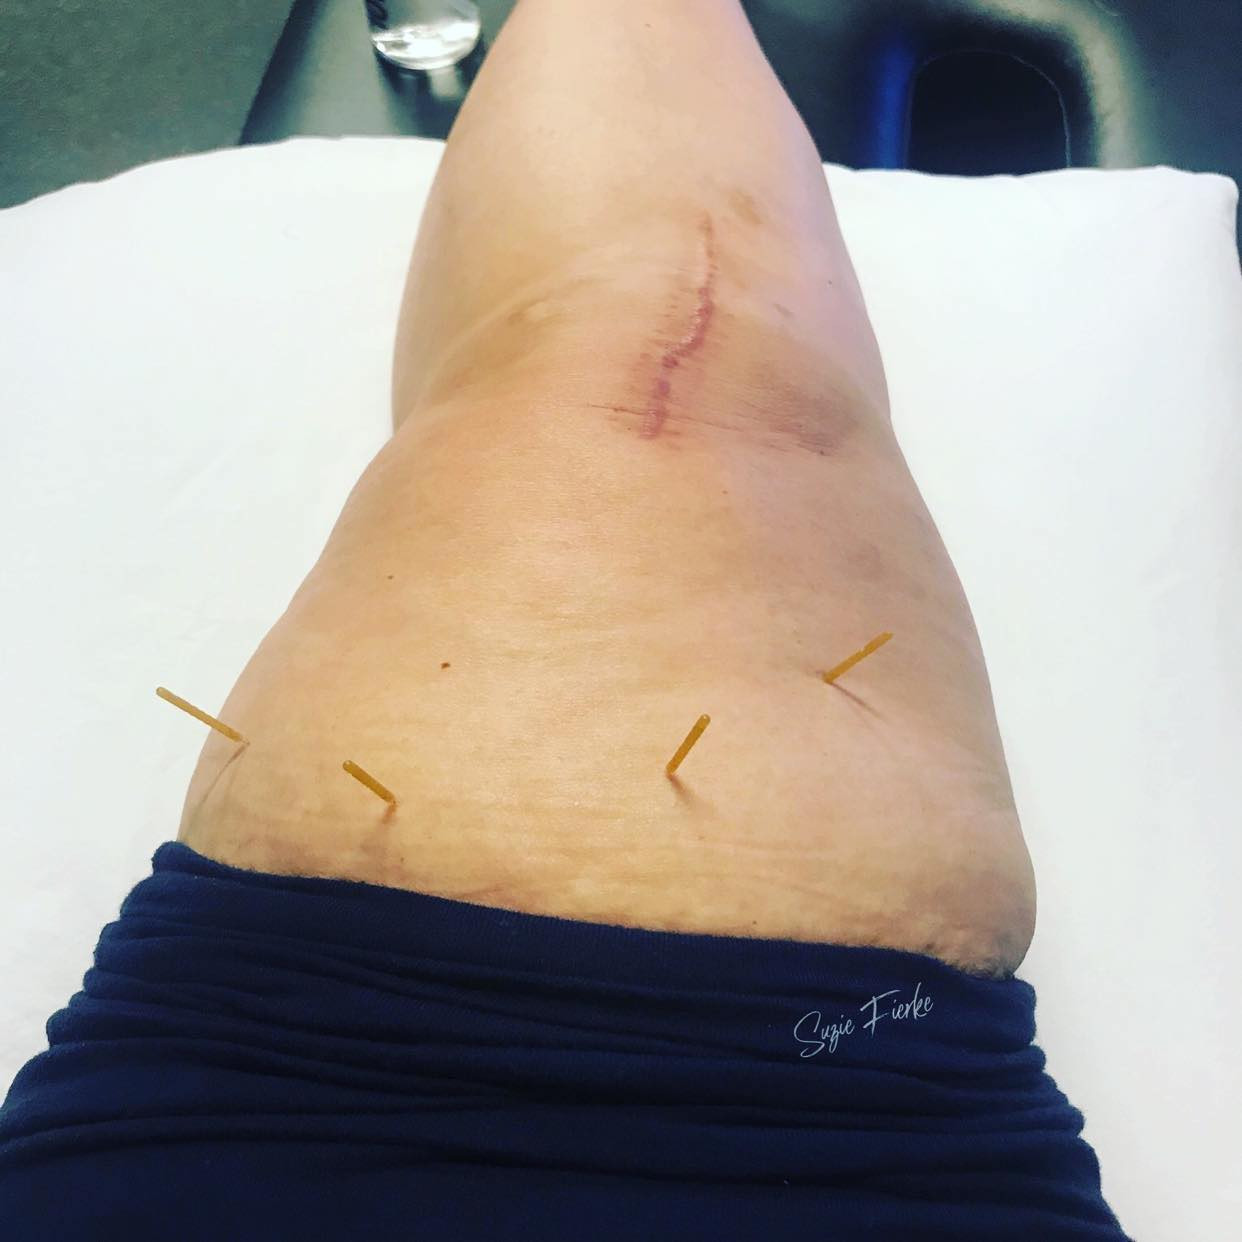 Poke the Pain Away – Dry Needling for Knee Replacement